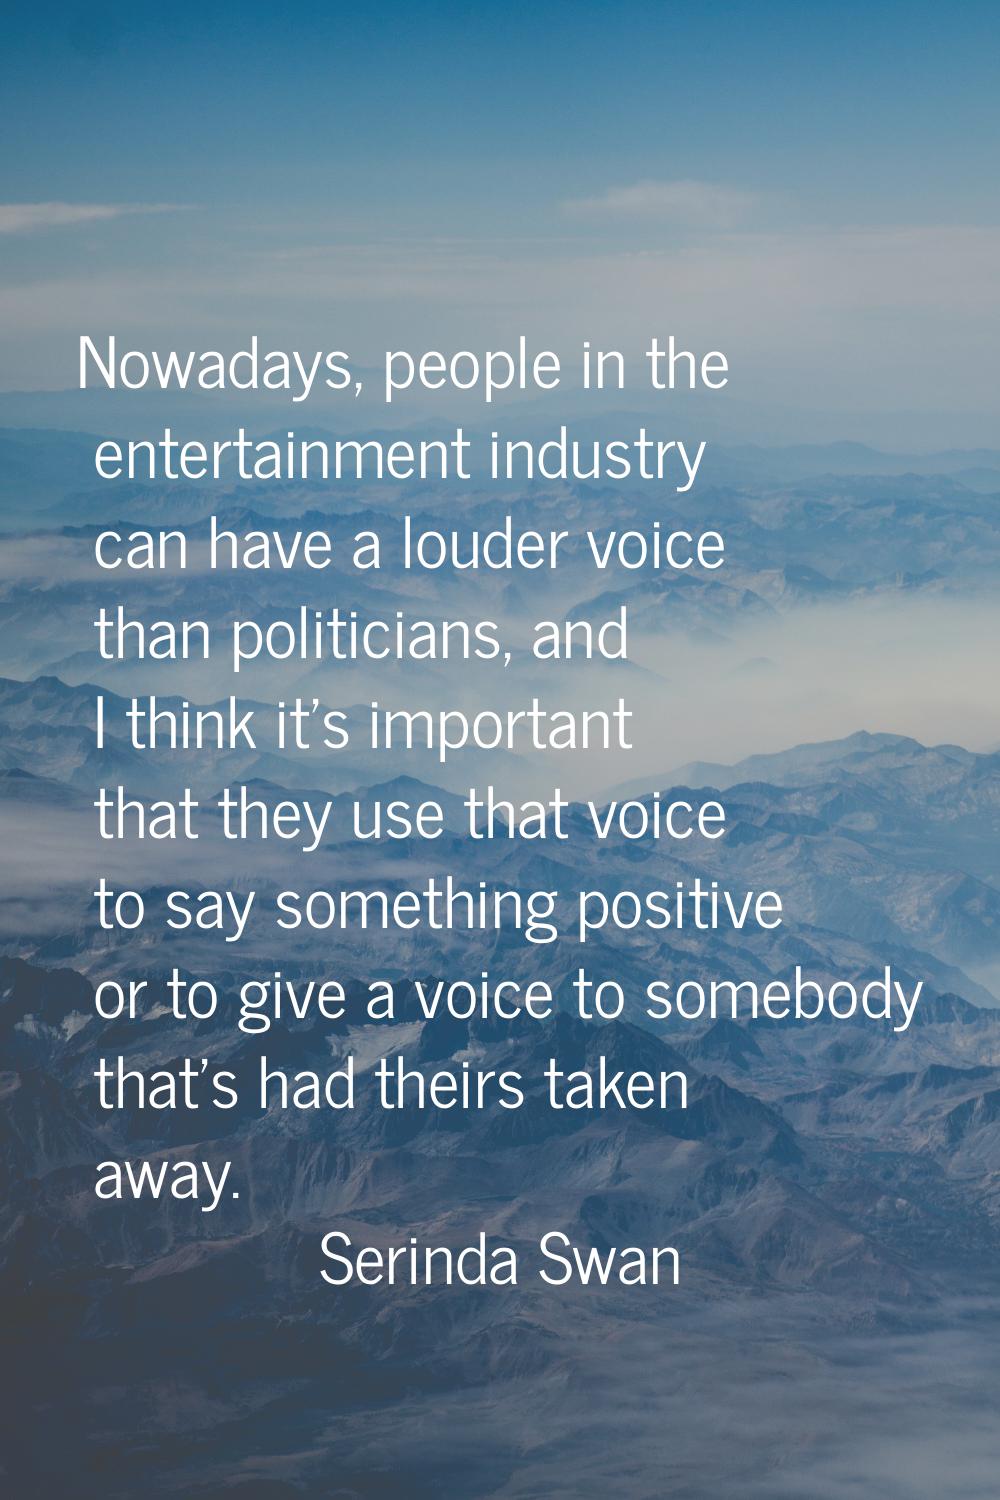 Nowadays, people in the entertainment industry can have a louder voice than politicians, and I thin